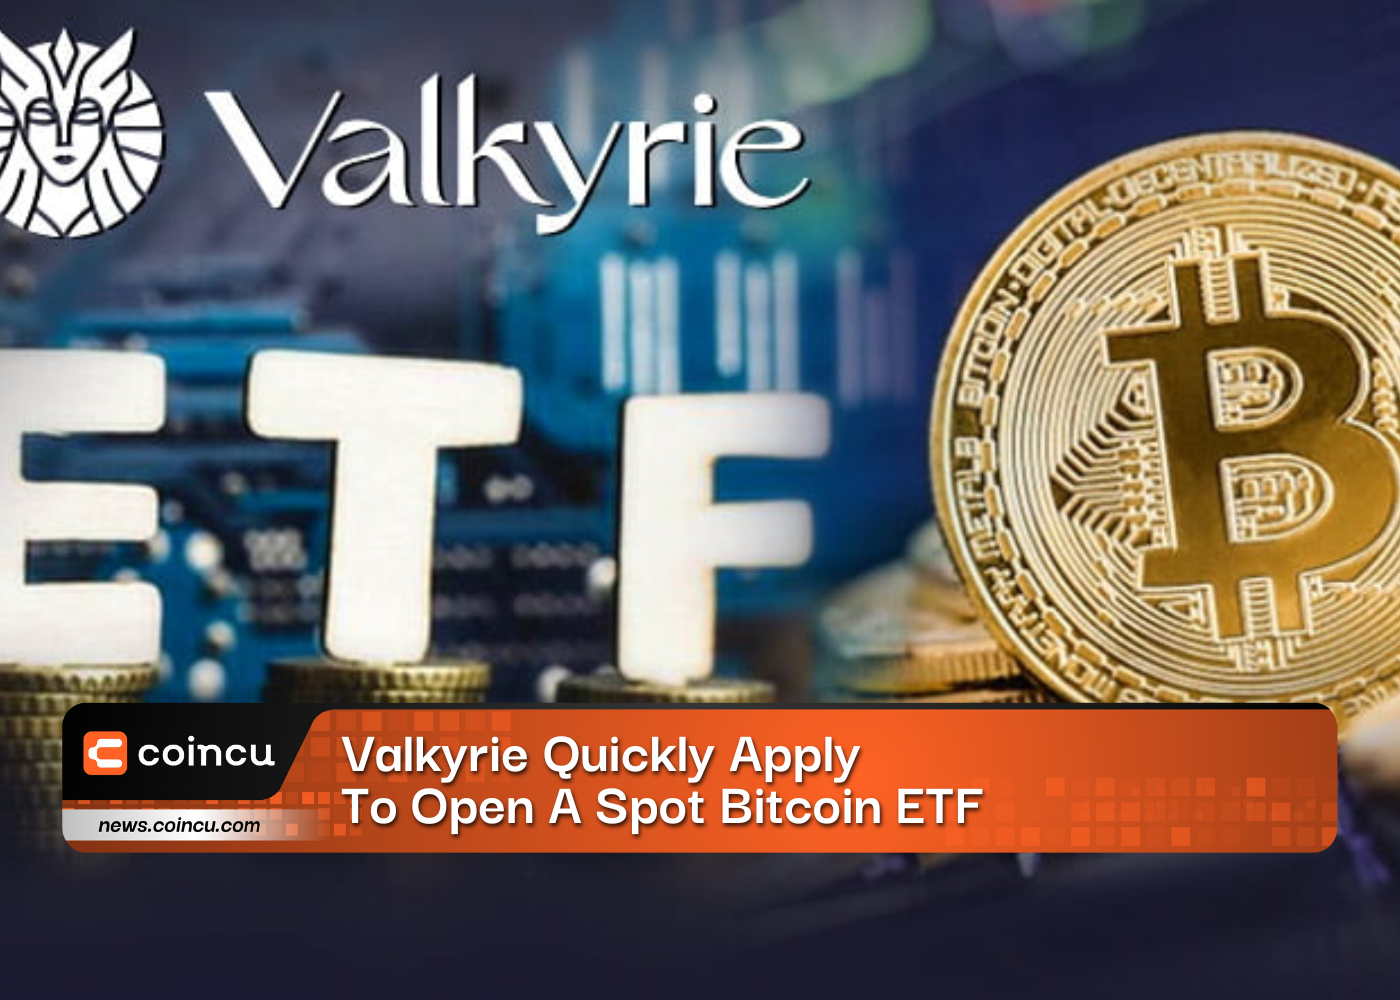 Valkyrie Quickly Apply To Open A Spot Bitcoin ETF